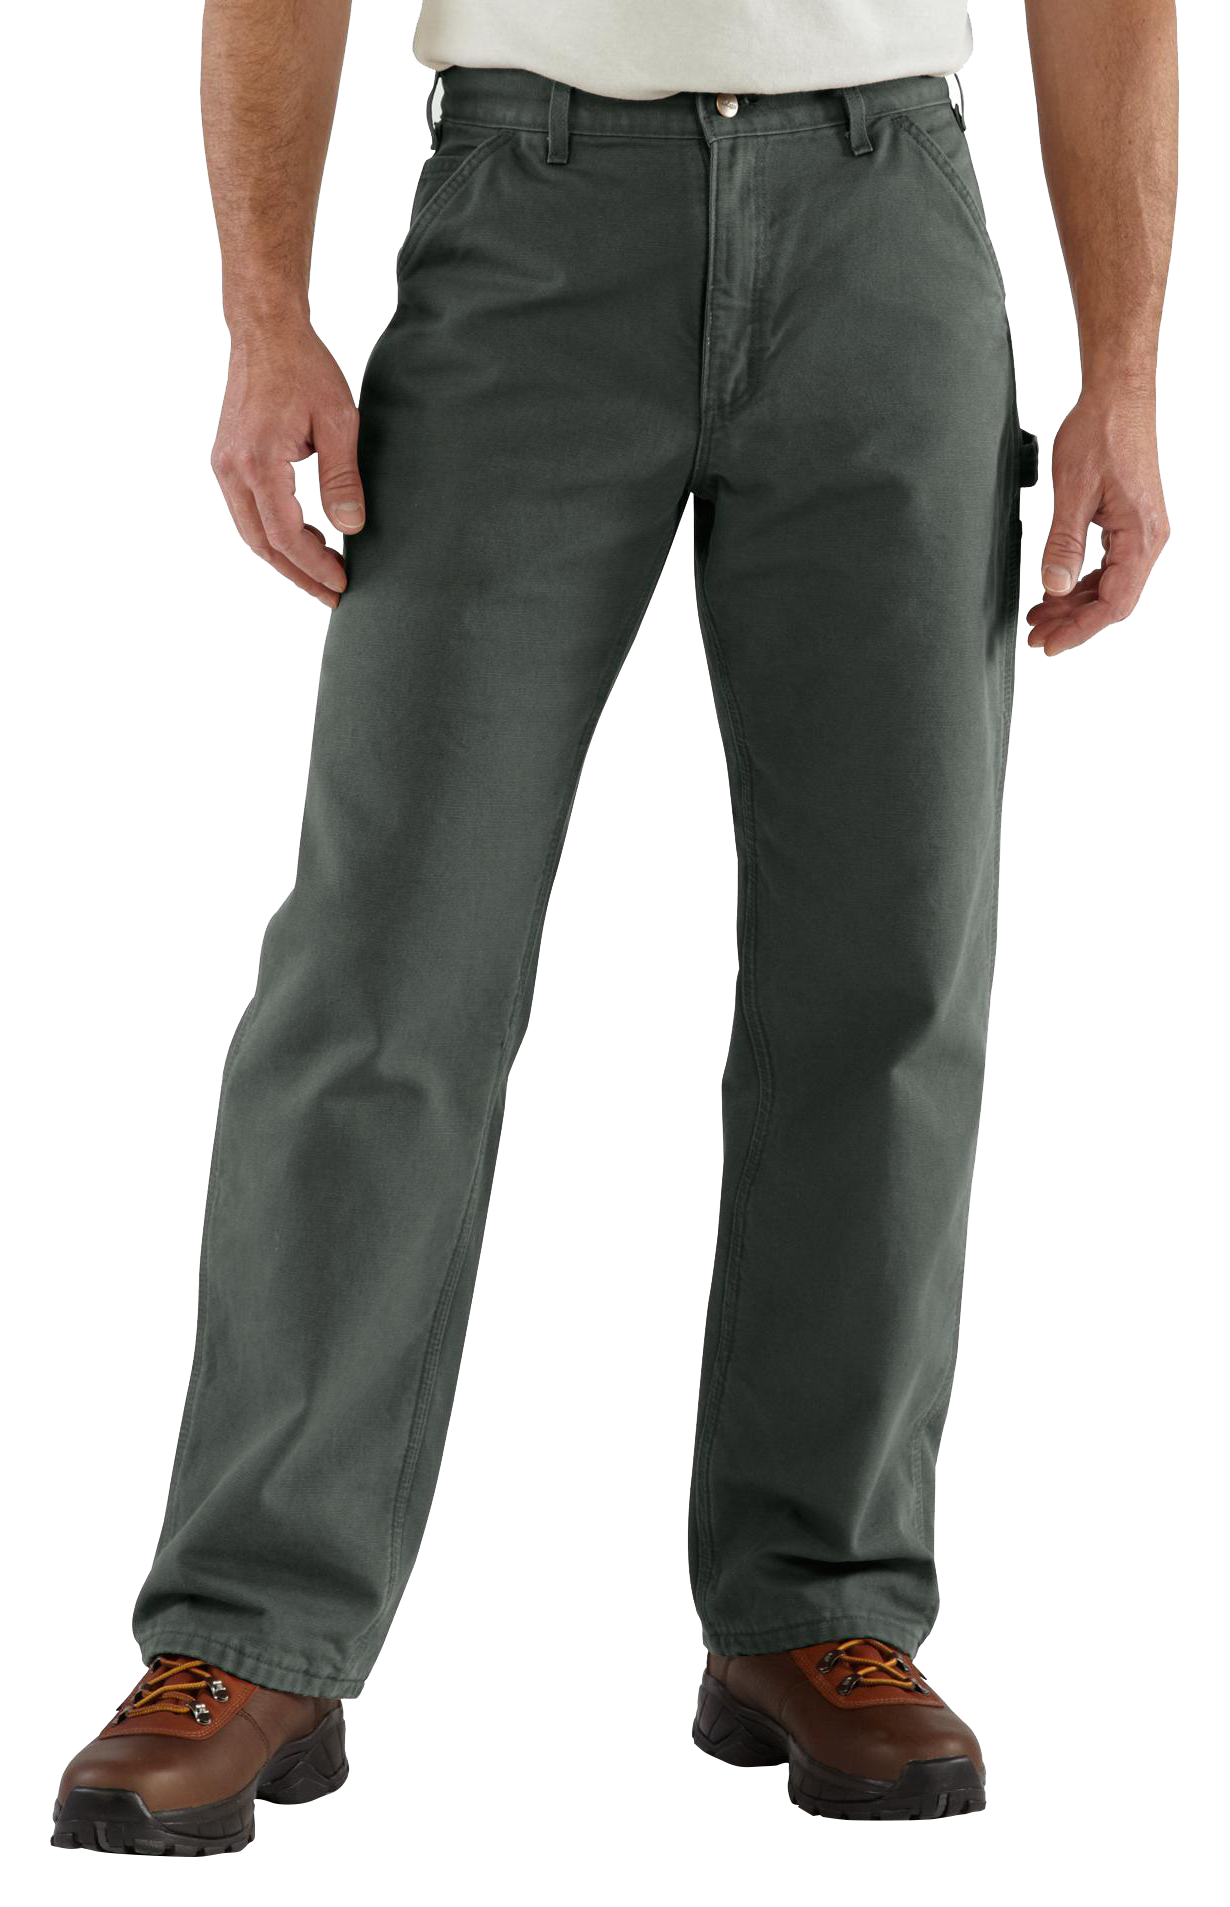 Carhartt Loose-Fit Washed Duck Utility Work Pants for Men